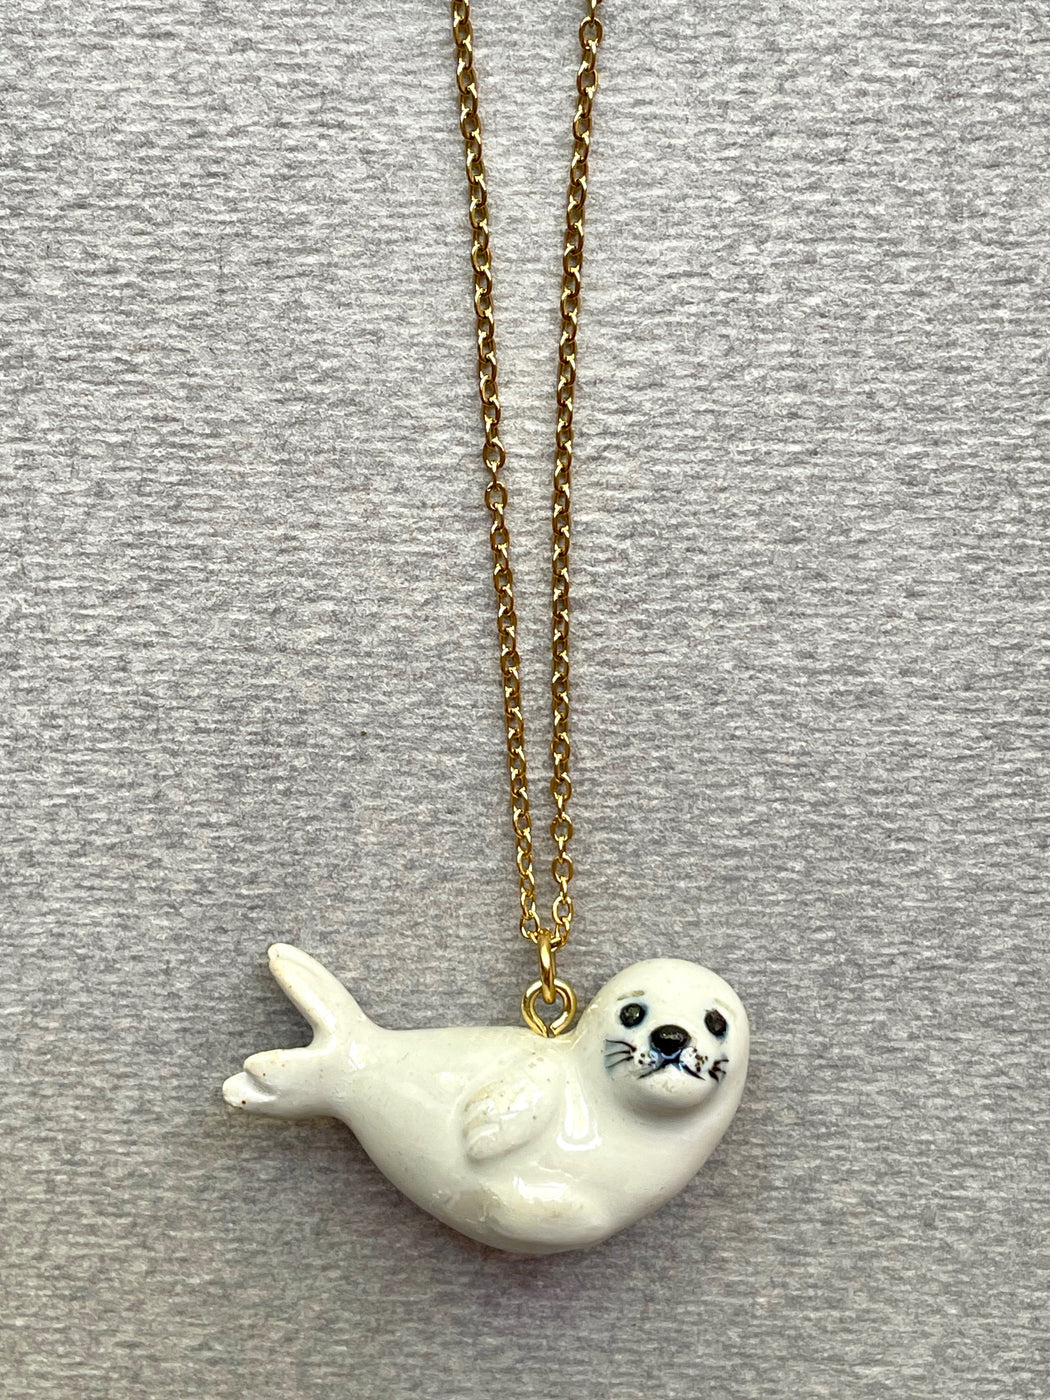 Porcelain "Seal" Pendant by Camp Hollow